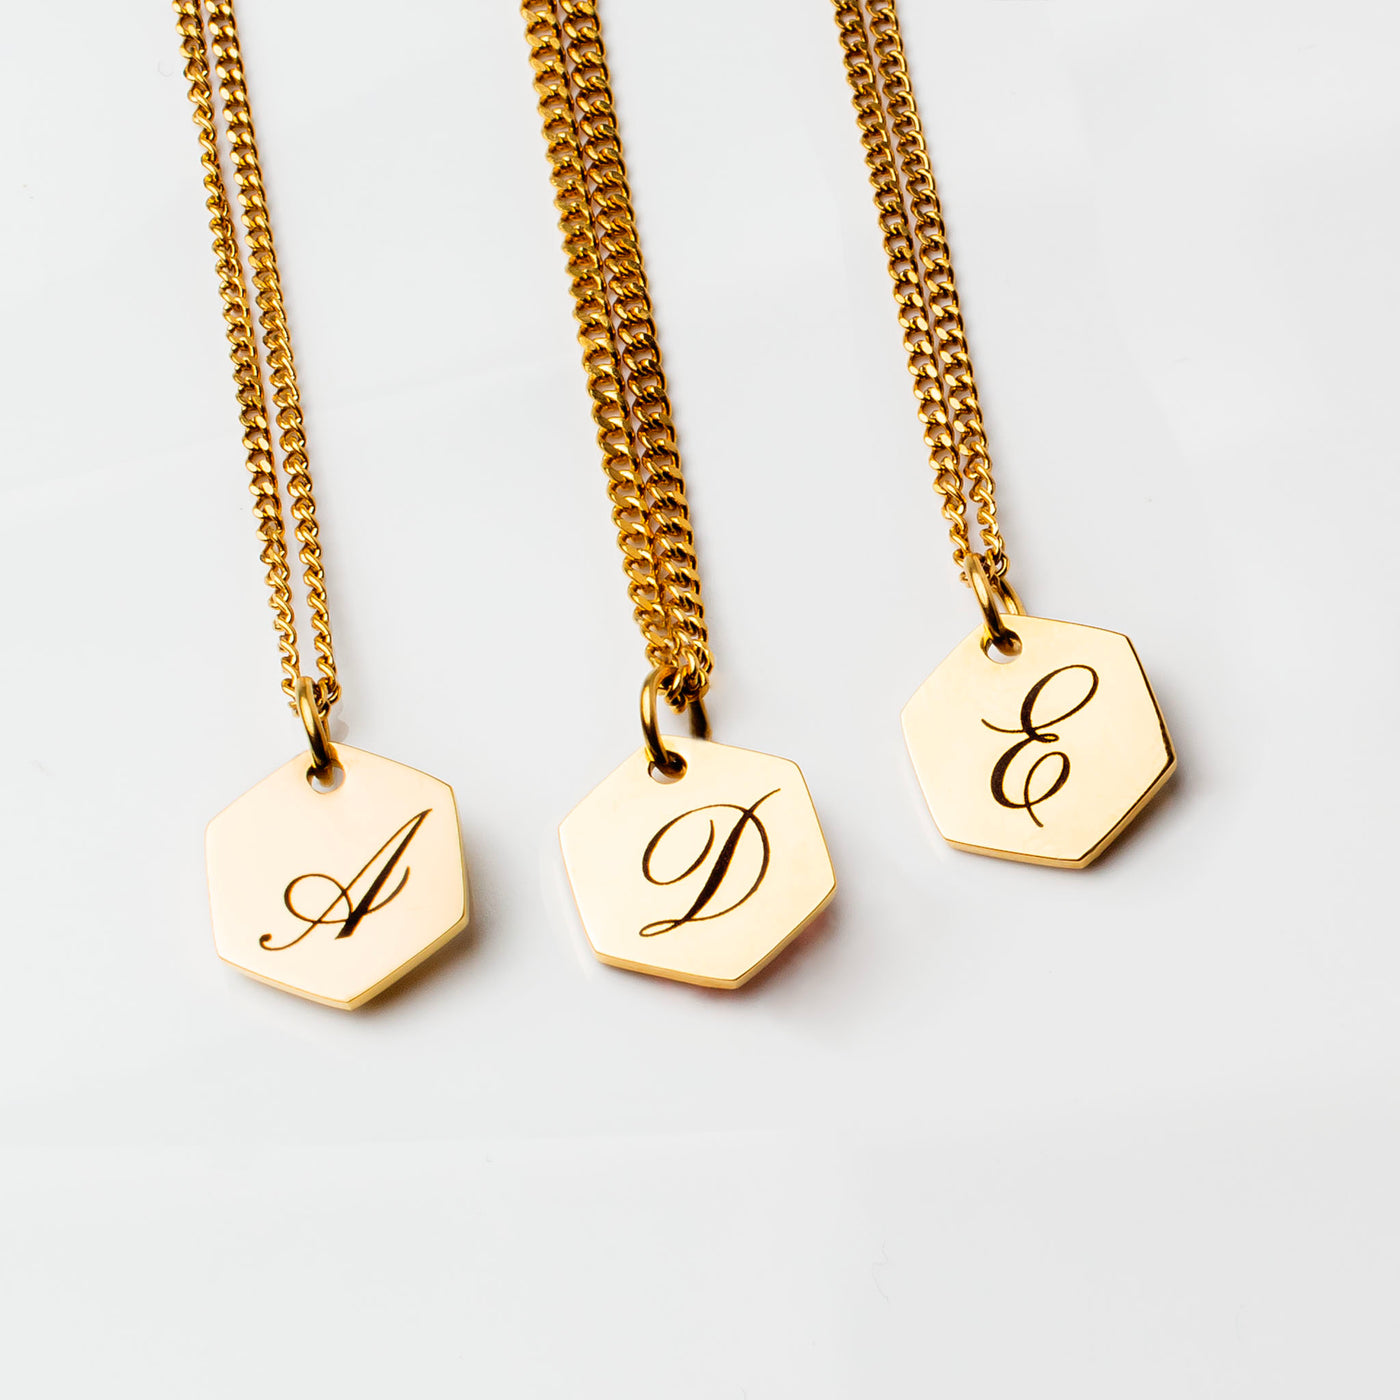 Extra Charm for Amore Engraved Initial Letter Necklace - Silver or Gold